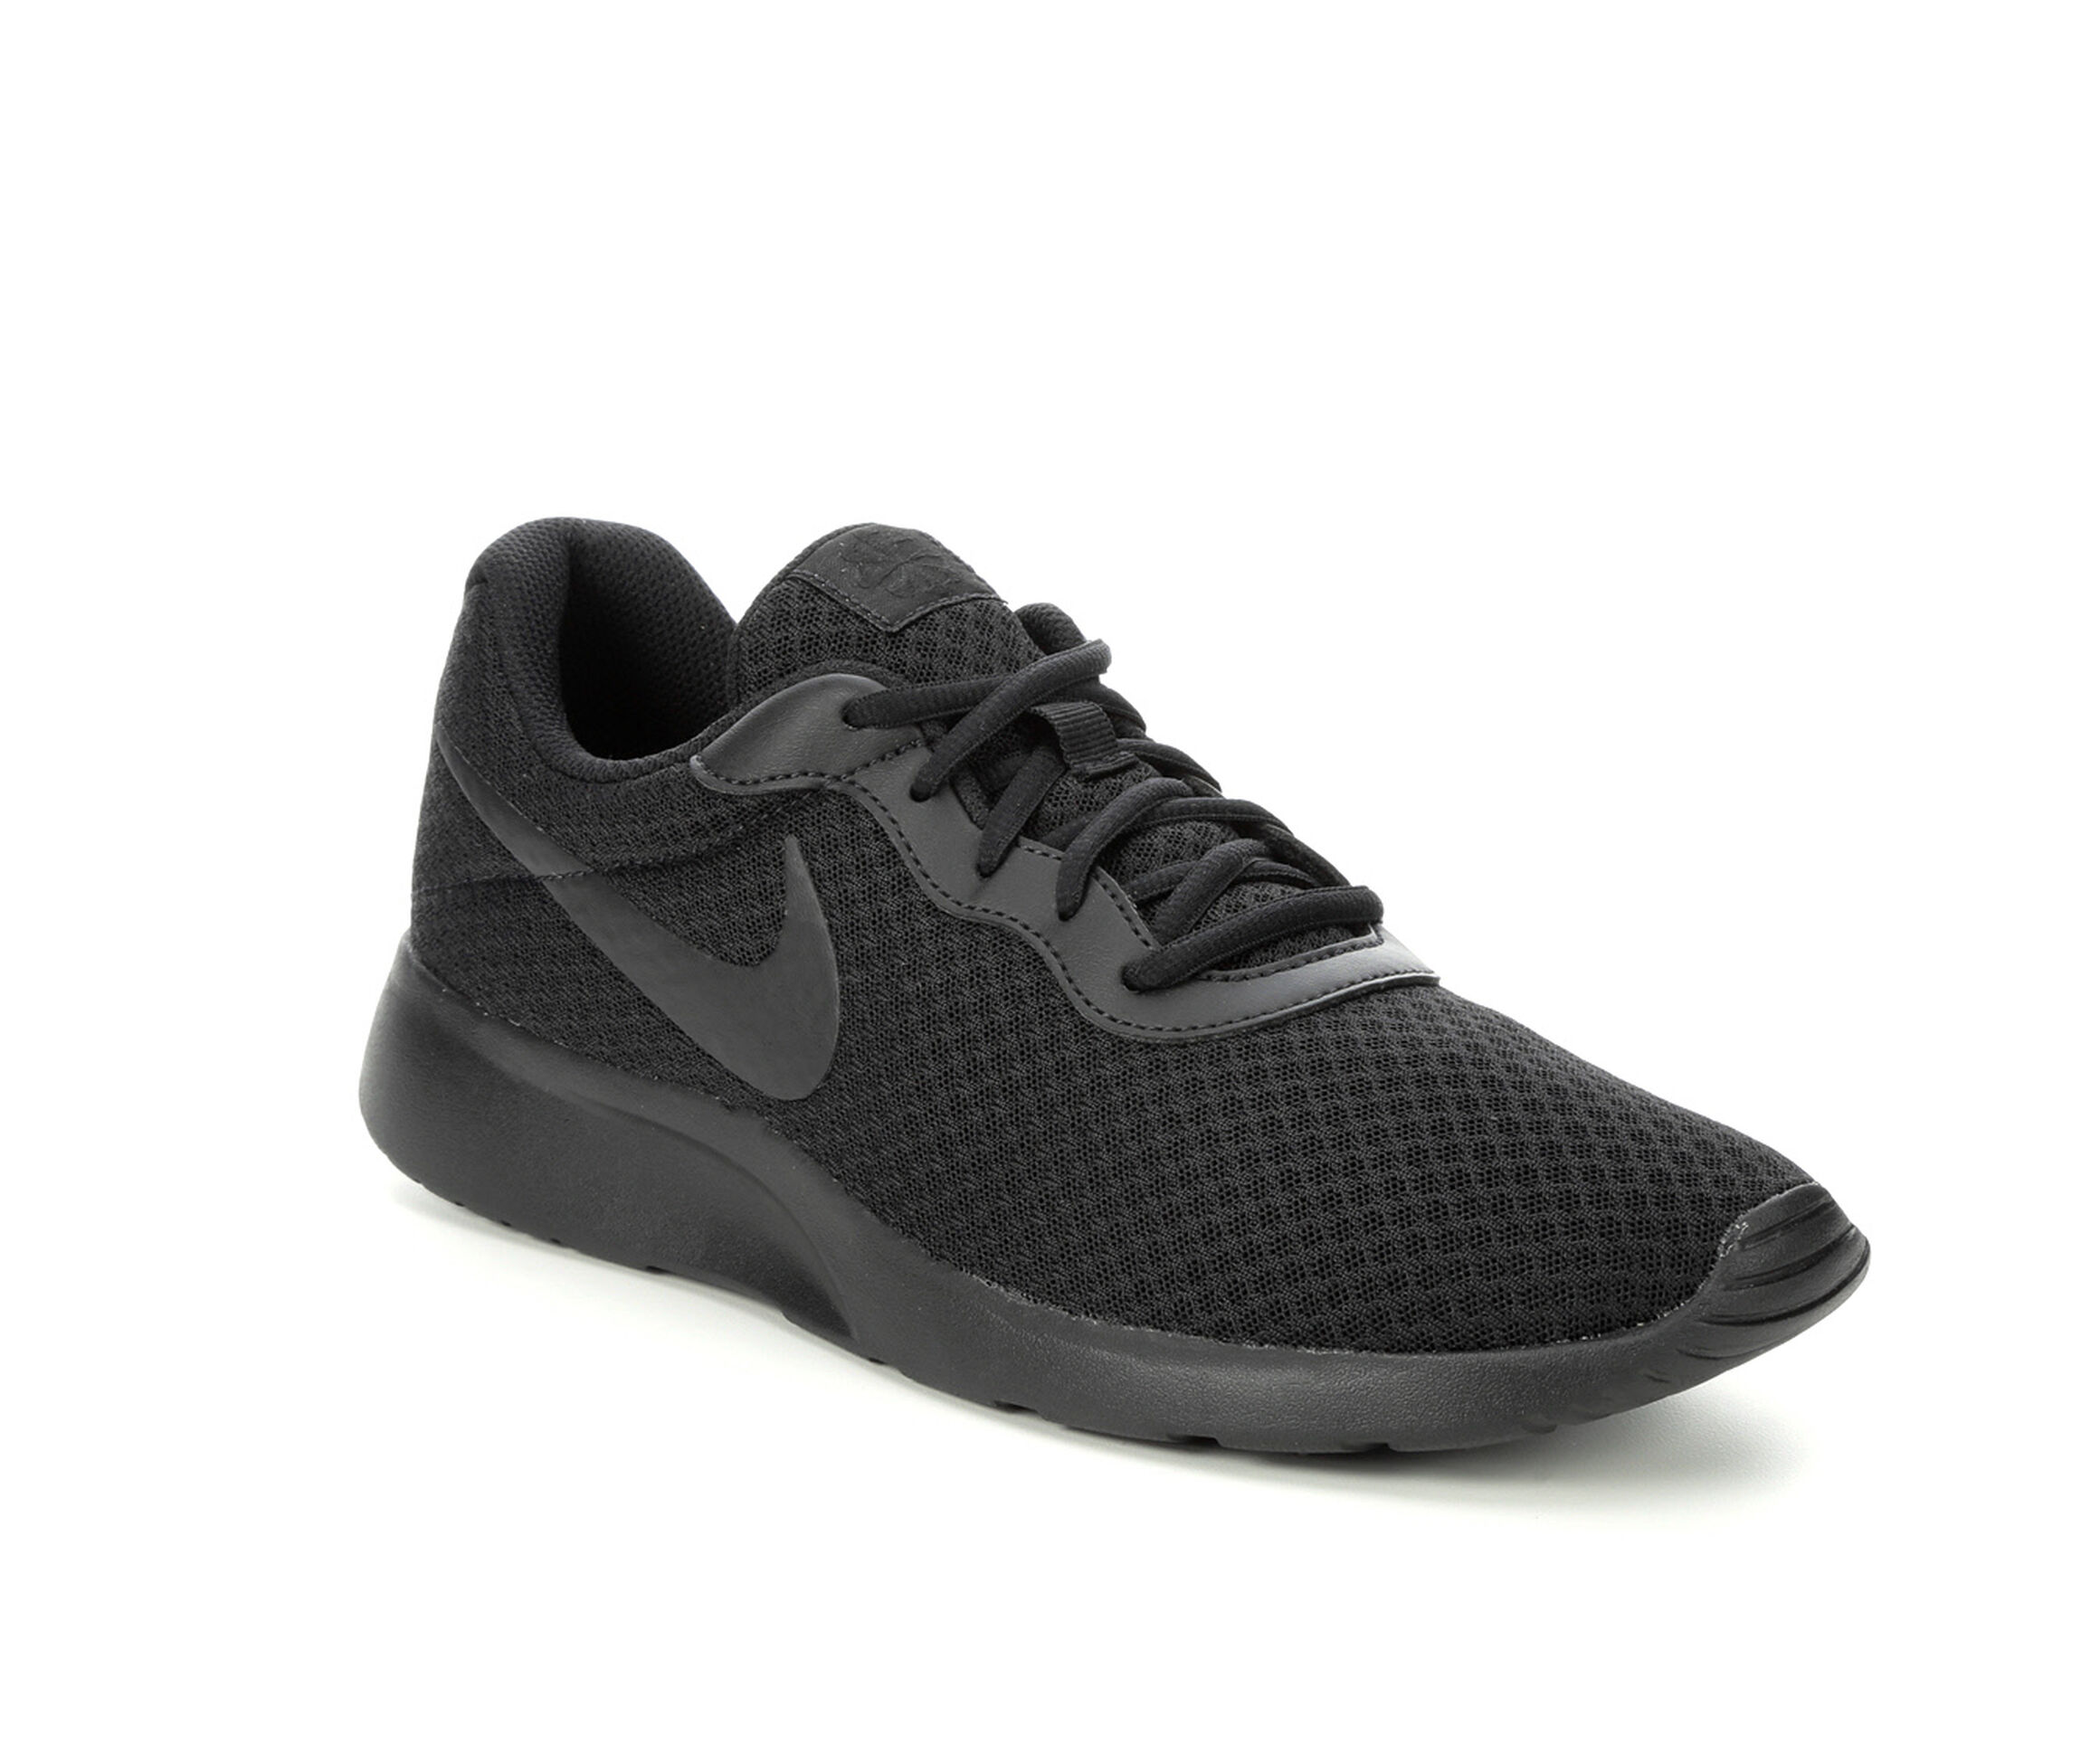 Nike Shoes for Men, Air Max | Shoe Carnival